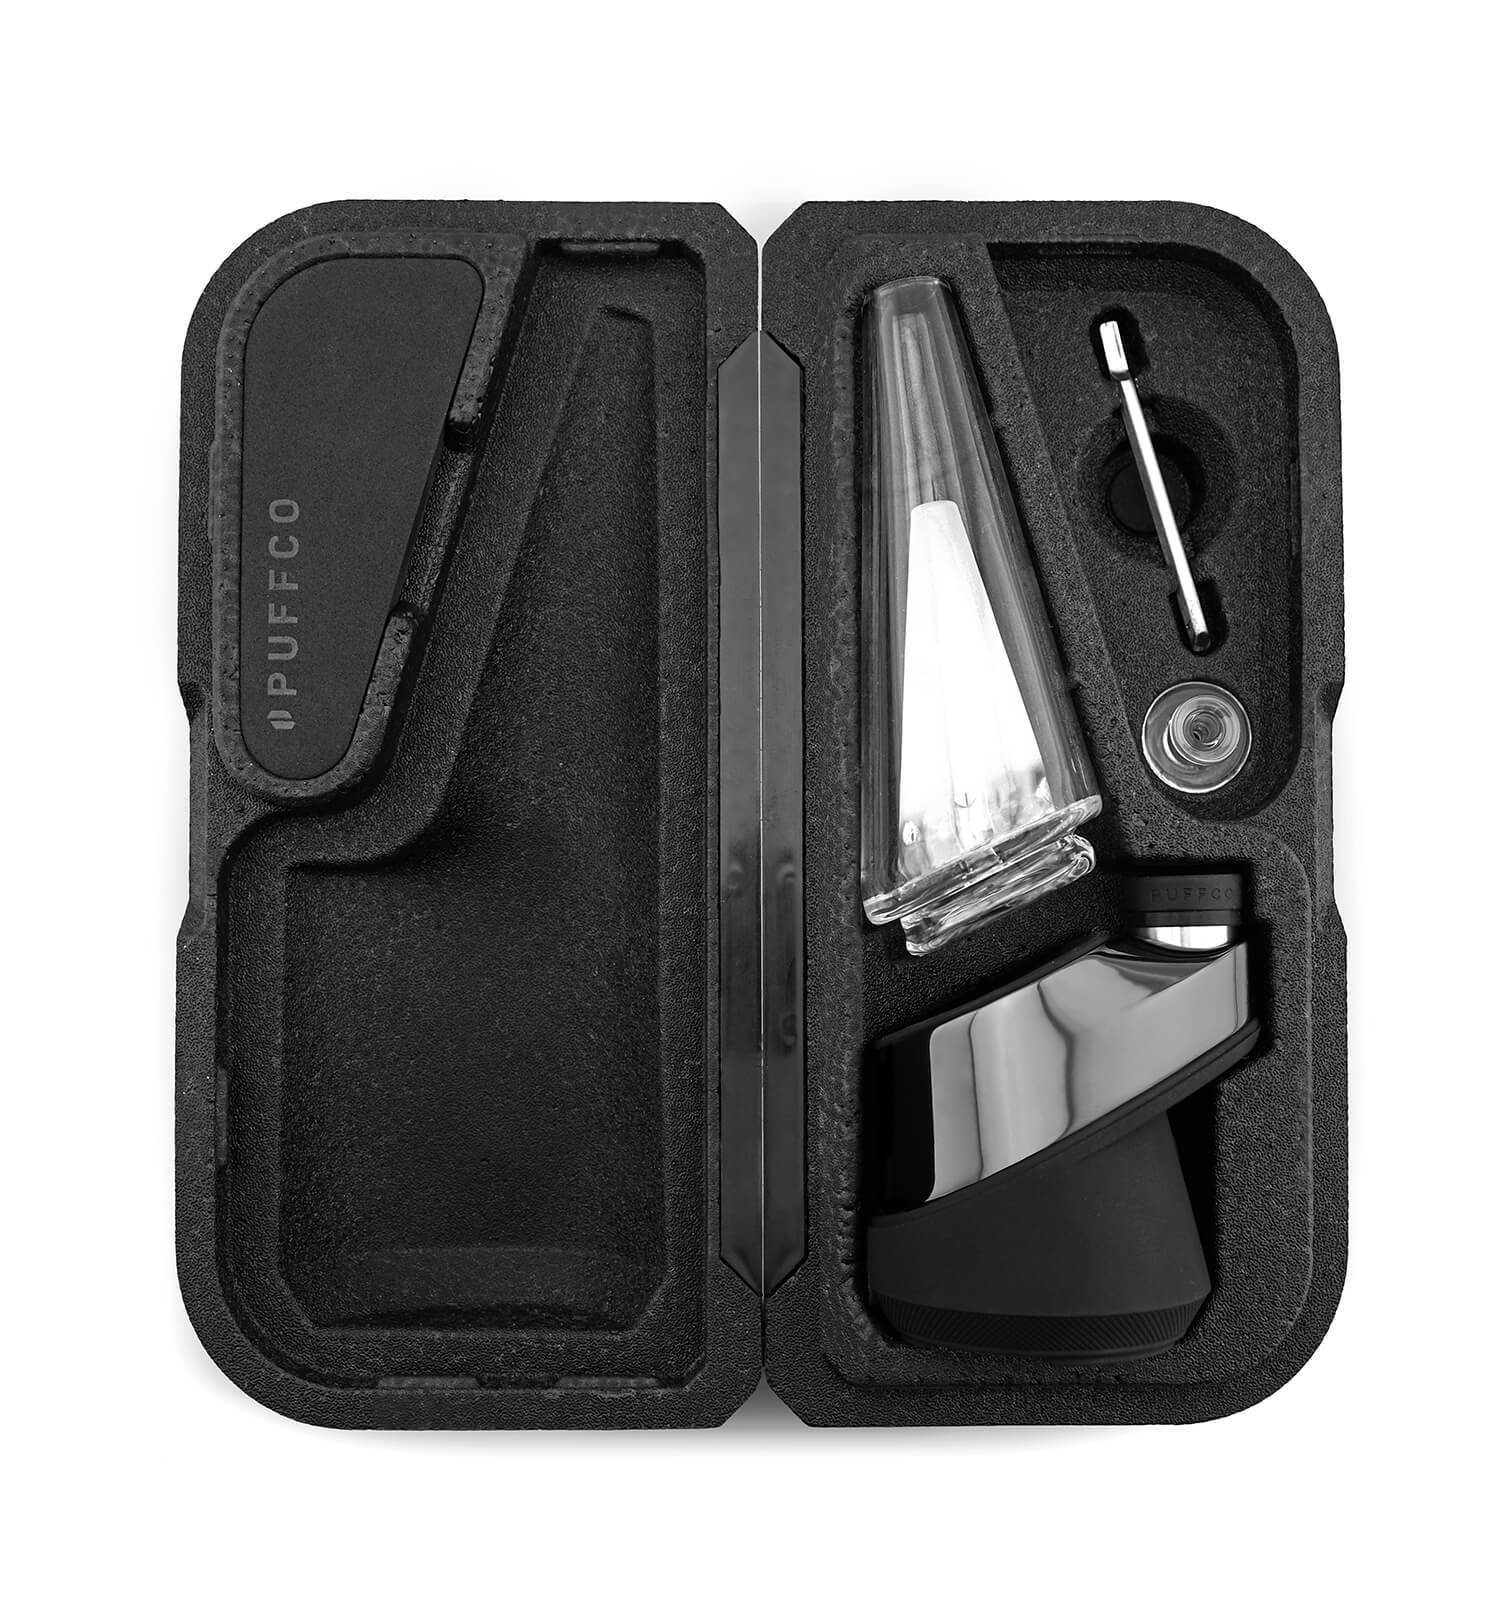 Inside of Puffco black carrying case with vaporizer and accessories